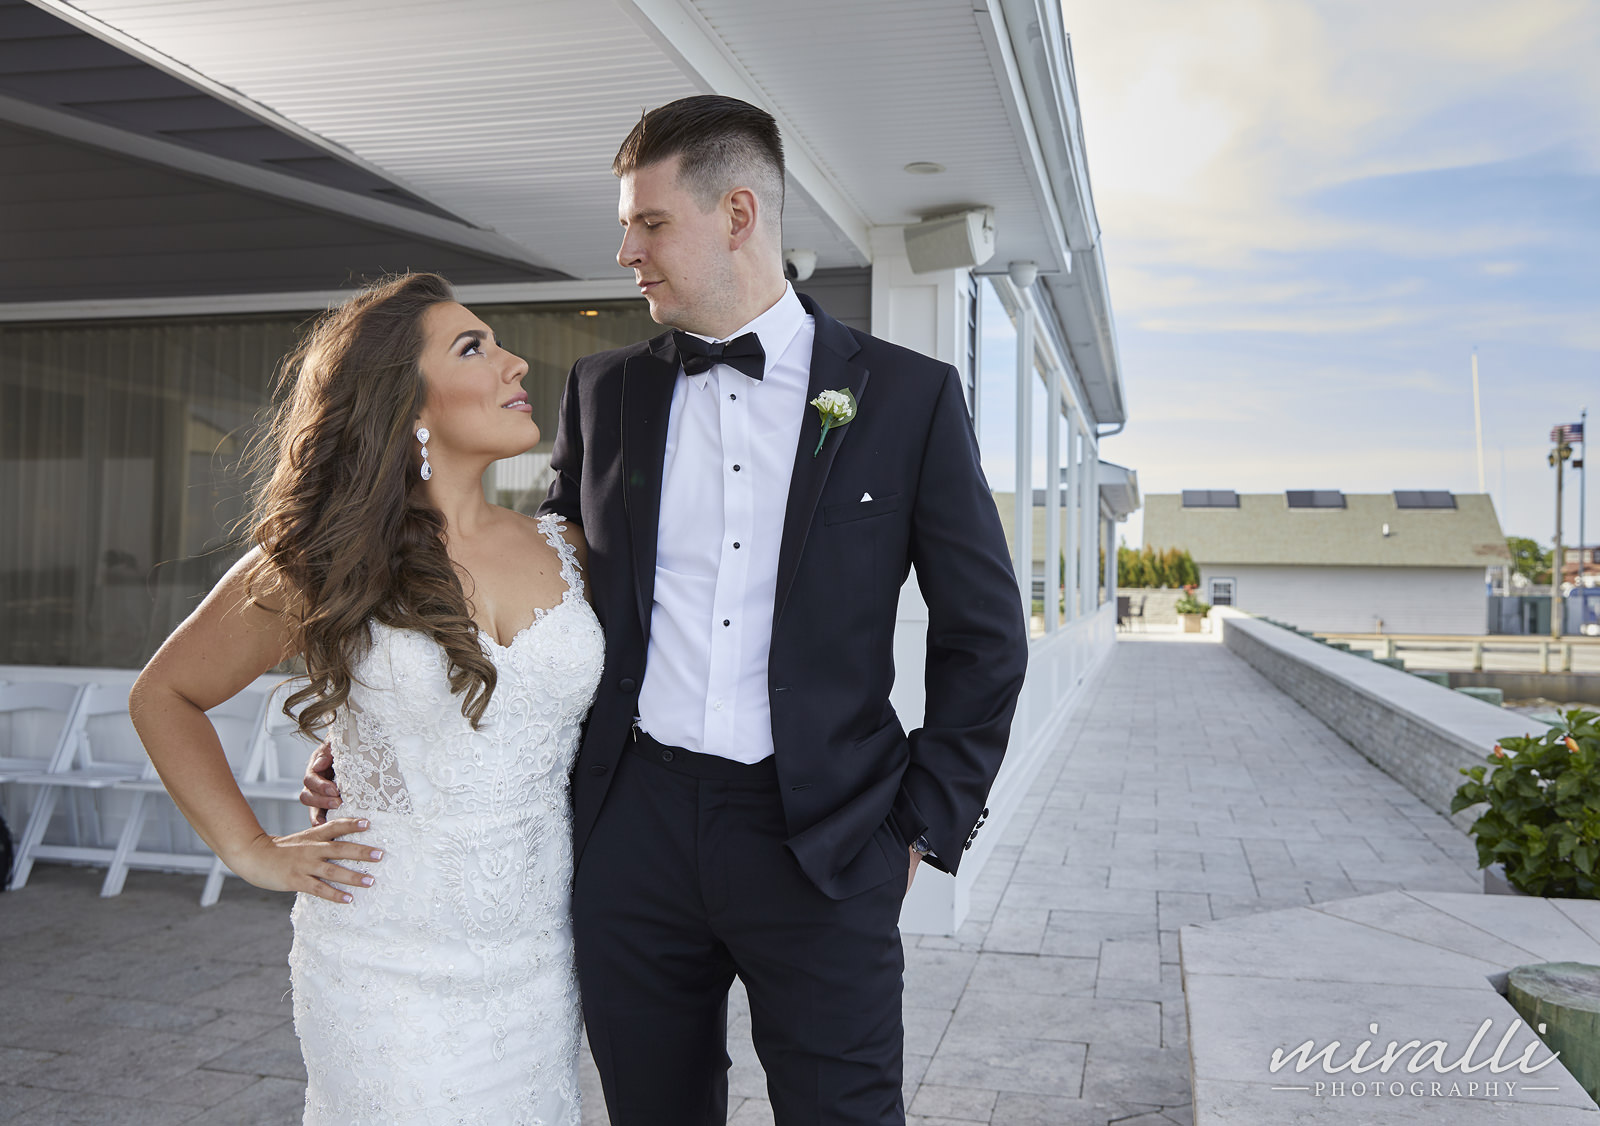 The Piermont Wedding Photos by Miralli Photography